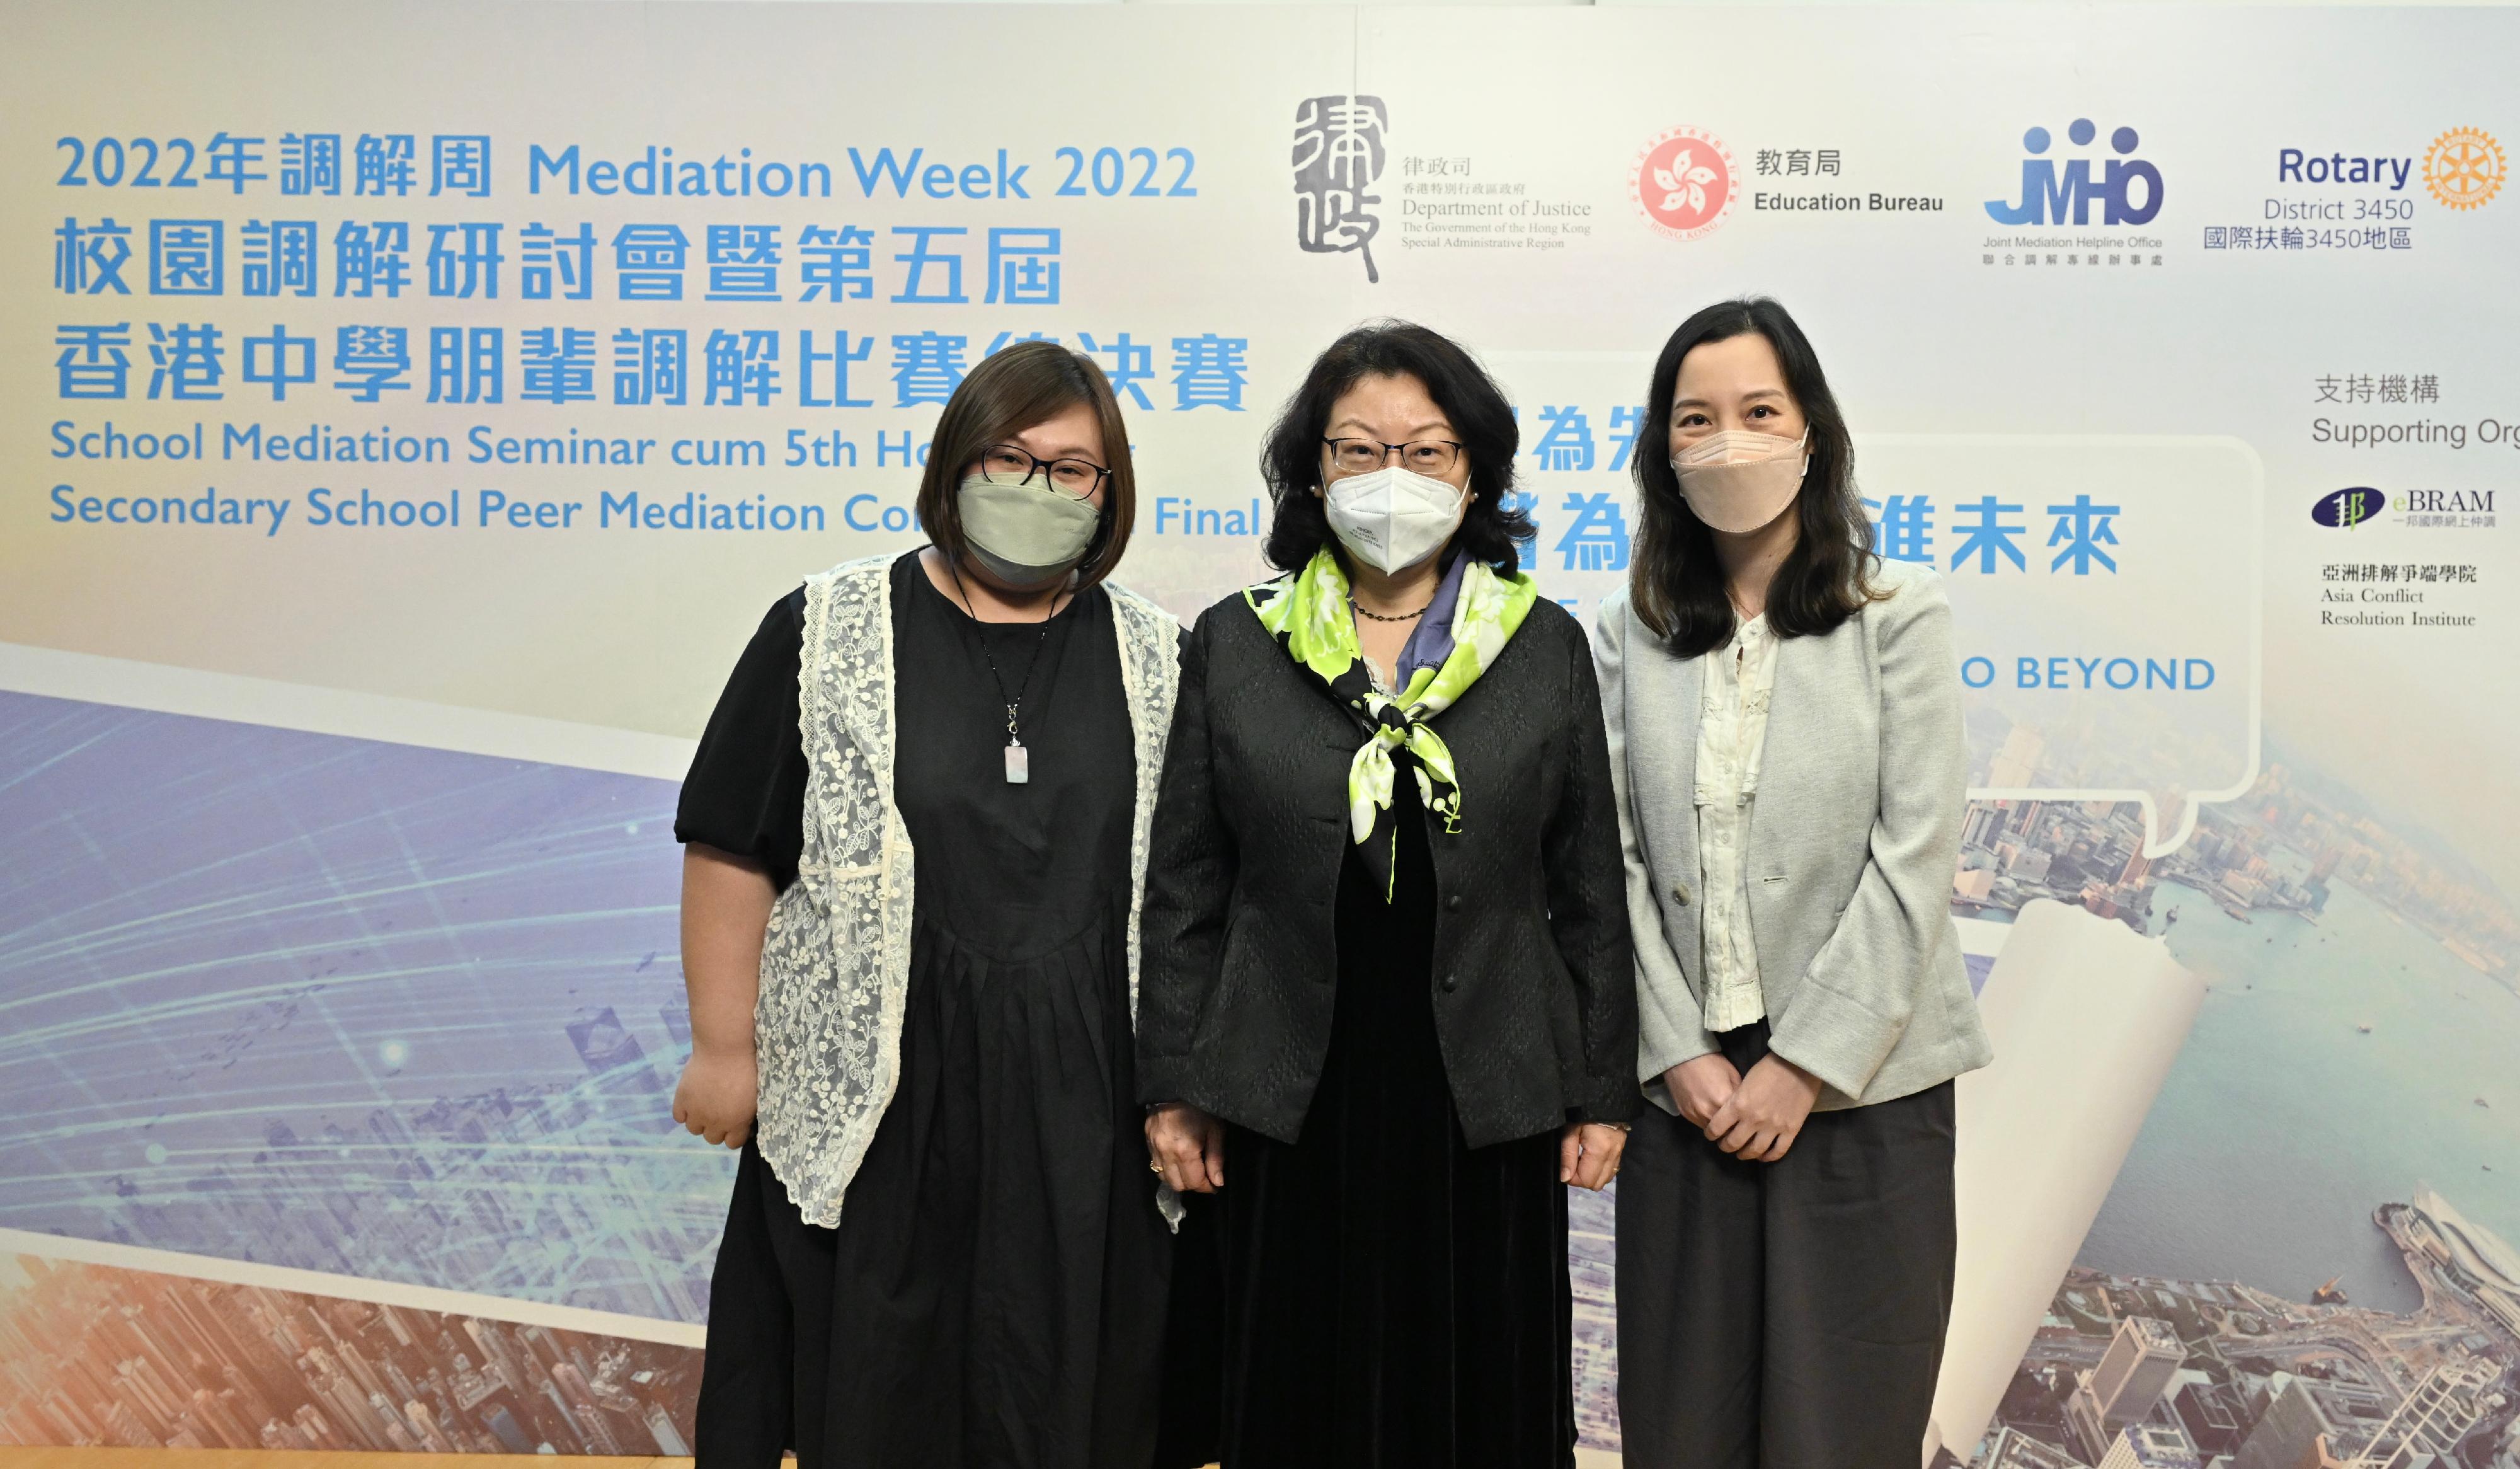 The Mediation Week 2022 organised by the Department of Justice (DoJ) was officially launched today (May 2). Picture shows the Secretary for Justice, Ms Teresa Cheng, SC, and speakers from the School Mediation Seminar.